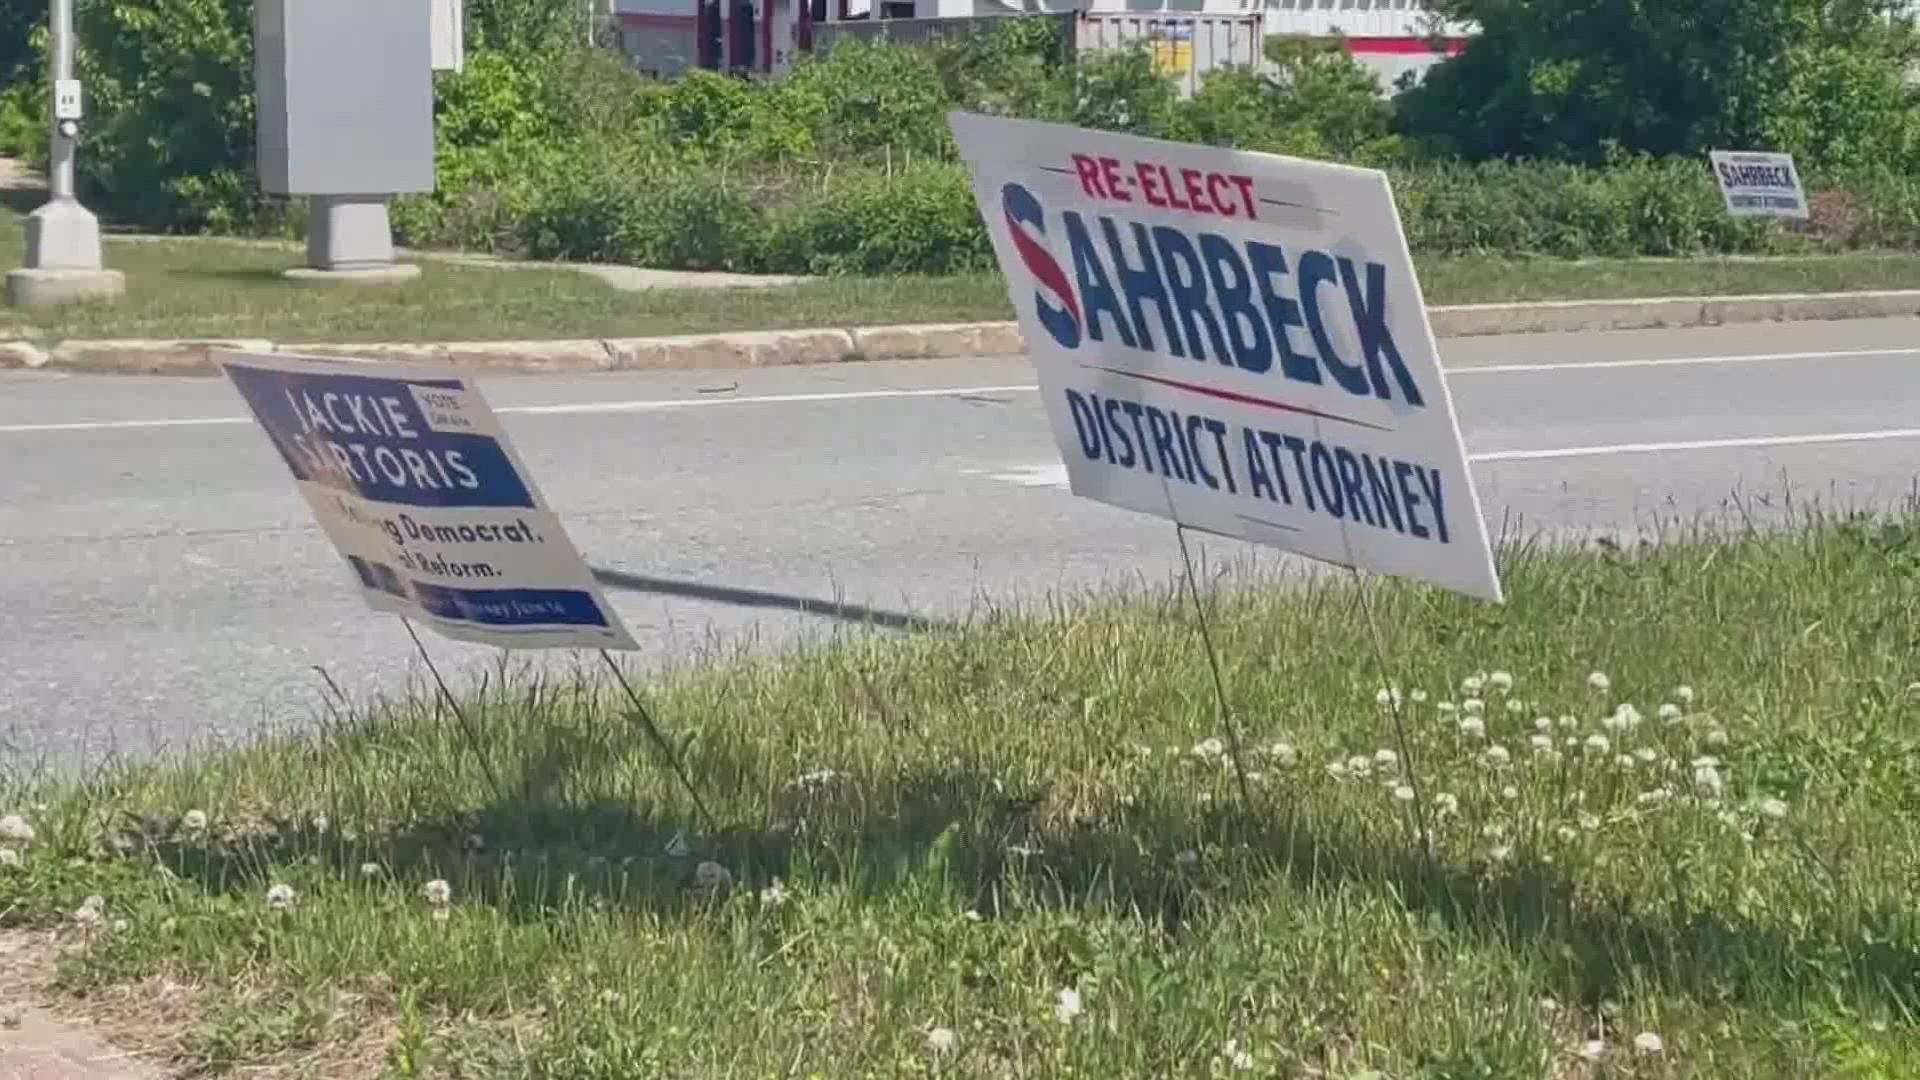 After $300,000 from George Soros paid for ads supporting Jackie Sartoris' Cumberland County district attorney bid, the local primary has taken the national stage.